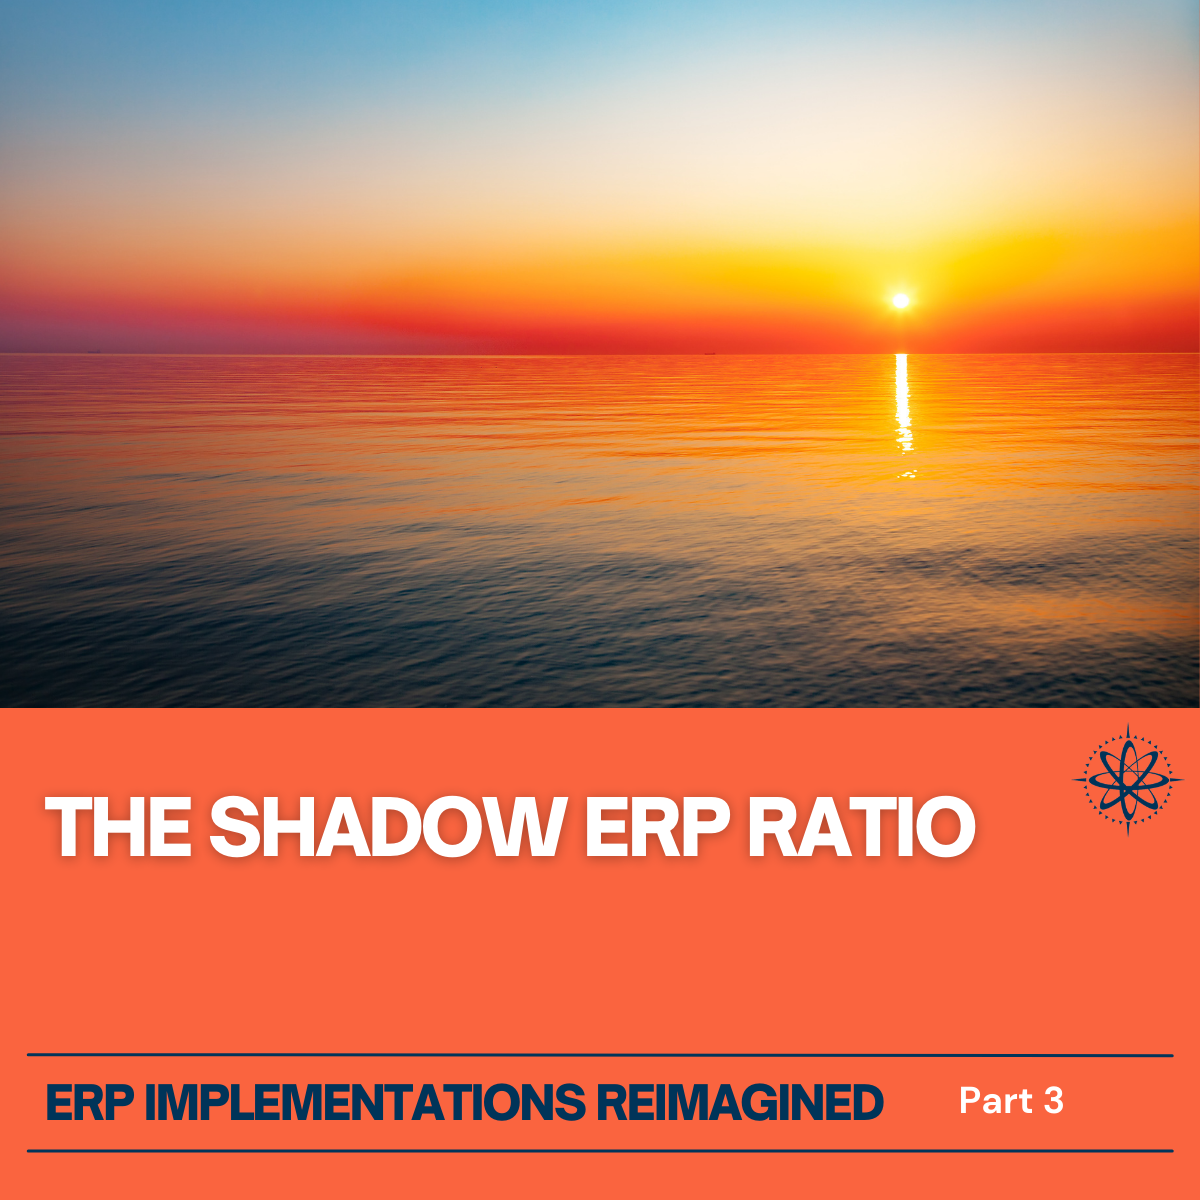 The sun rising on a new era in erp implementations